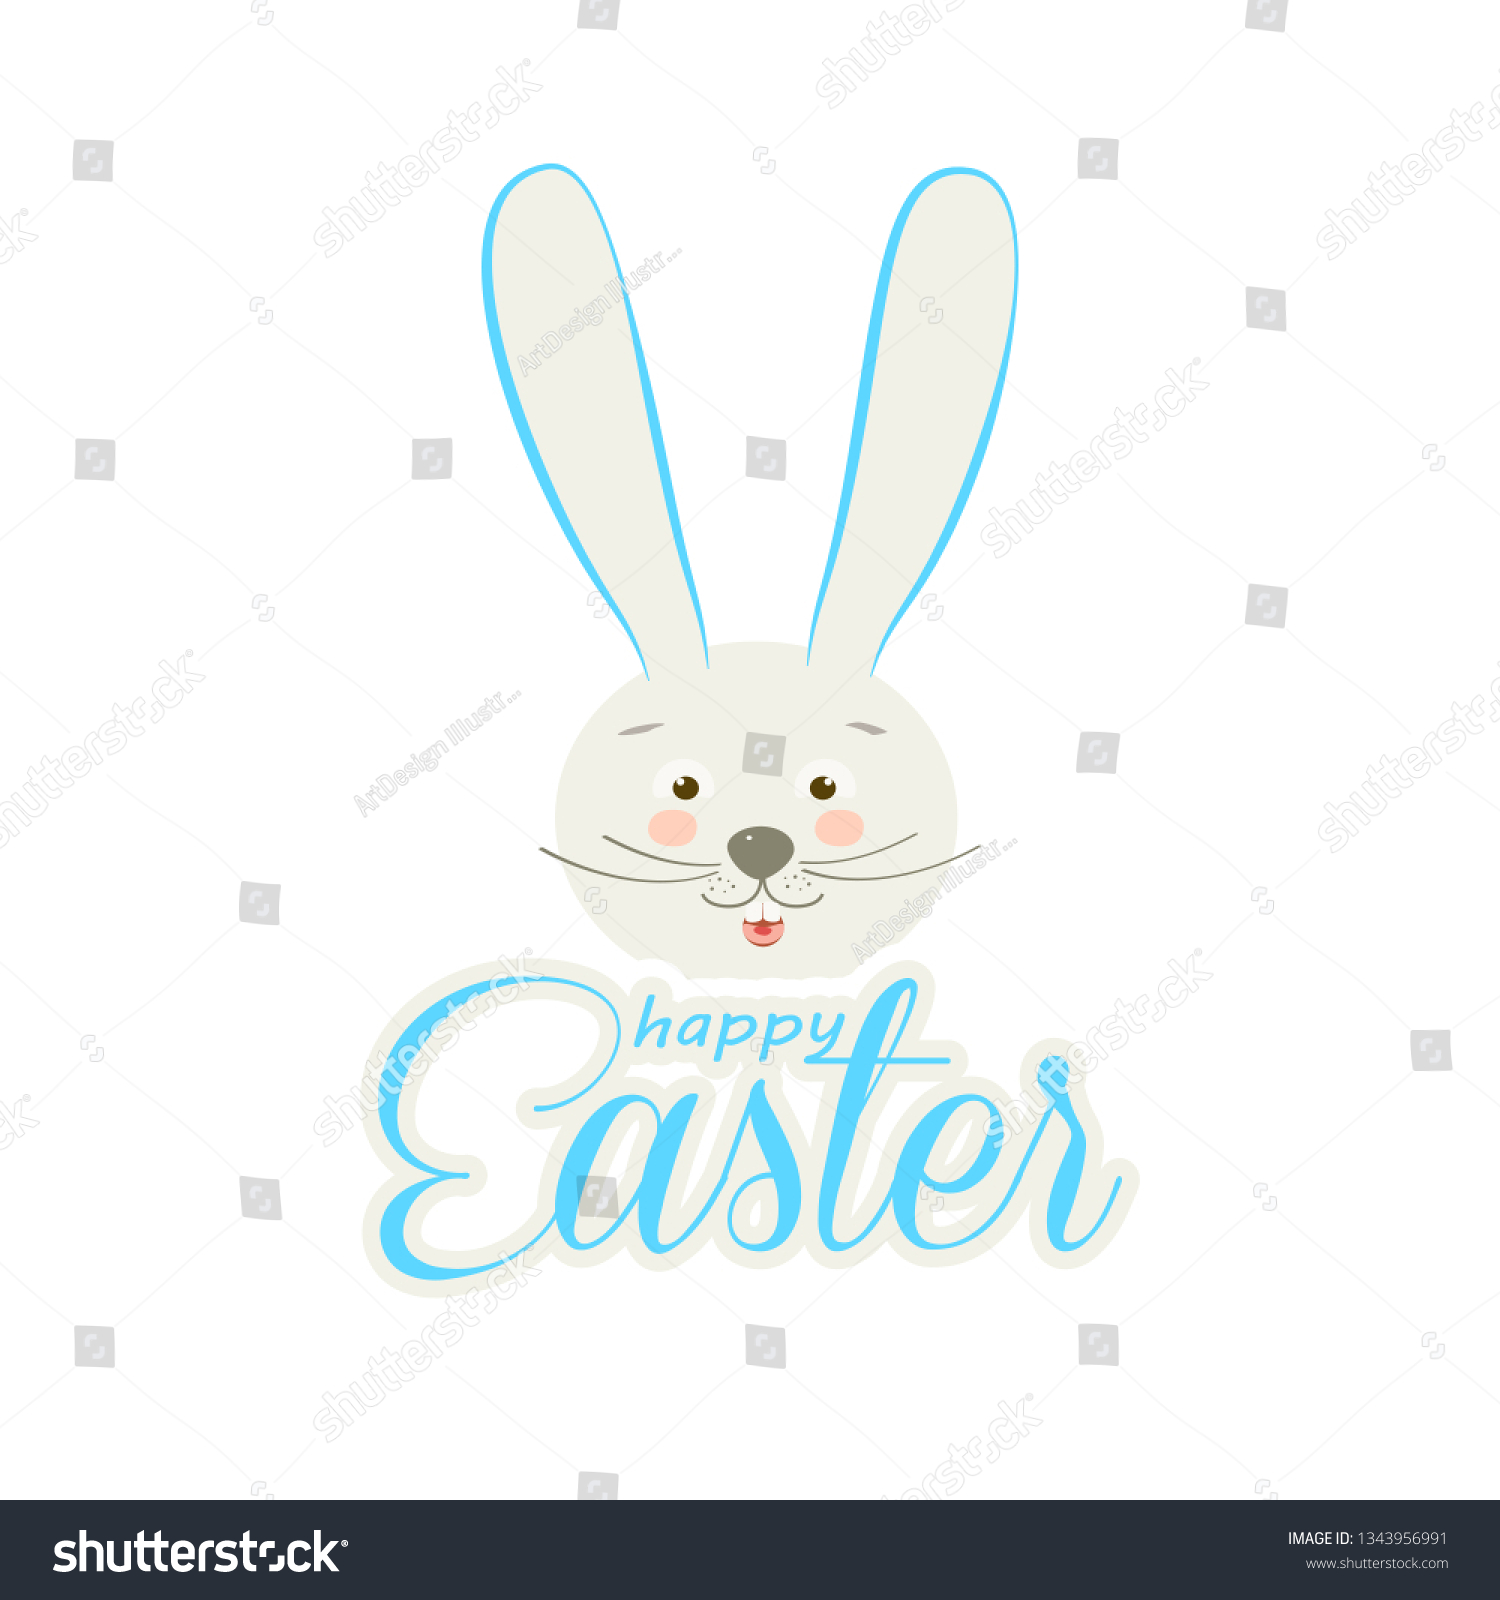 Happy Easter calligraphy greeting card  bunny character icon, cartoon rabbit animal, minimalist trendy style line art design fashion banner sale sign. Spring Holiday floral decoration #1343956991